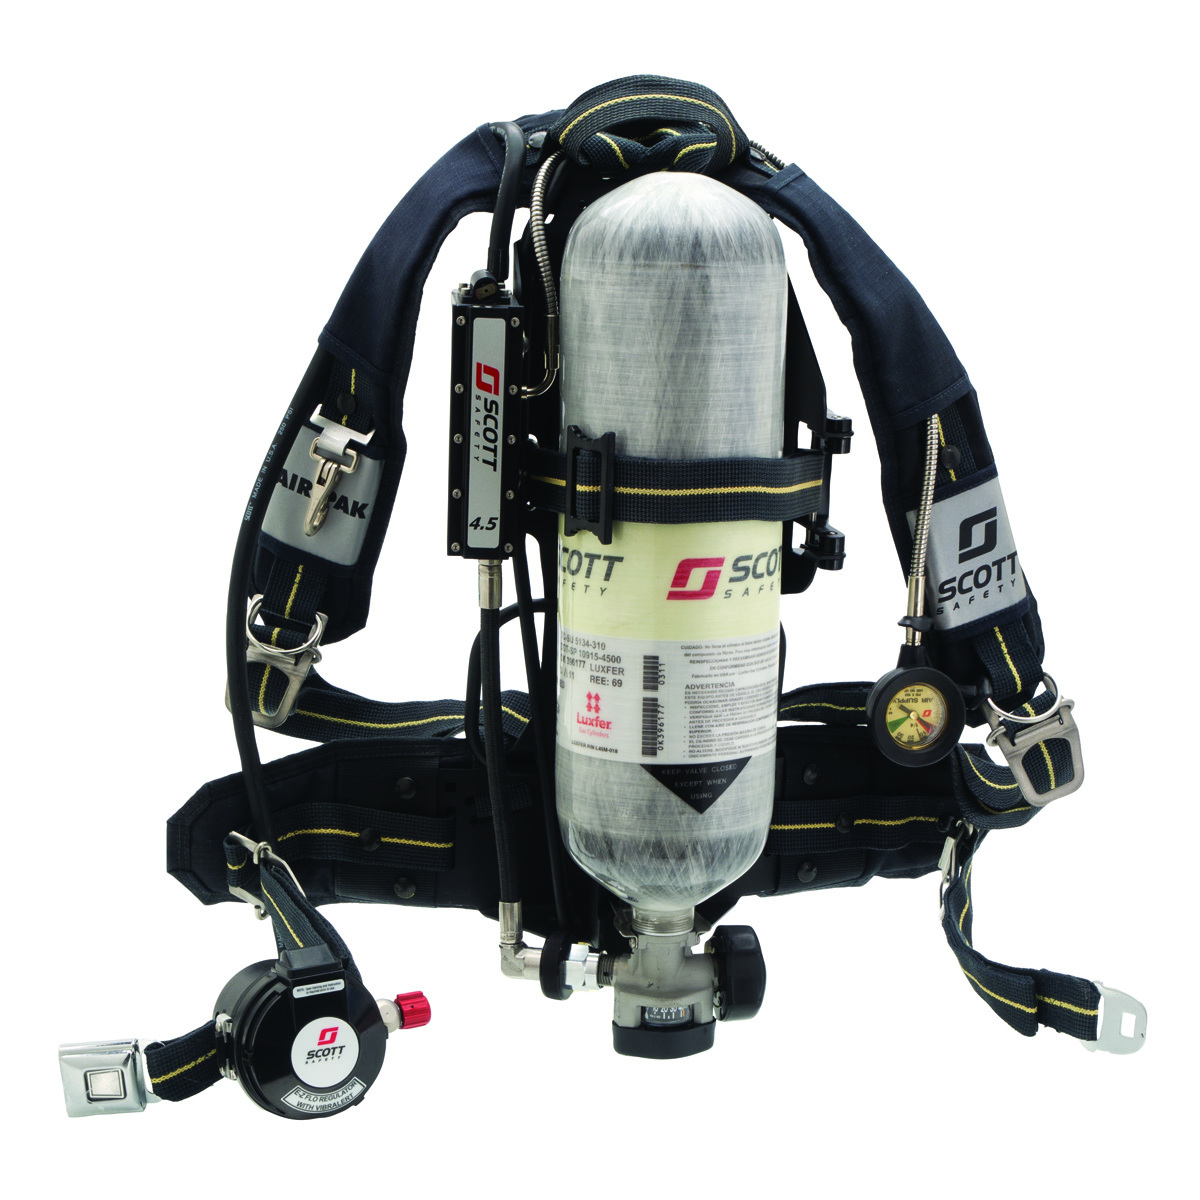 3M™ Scott™ 4500 psig Air-Pak 75i SCBA Self-Contained Breathing Apparatus (Cylinder, Facepiece And Case Sold Separately)